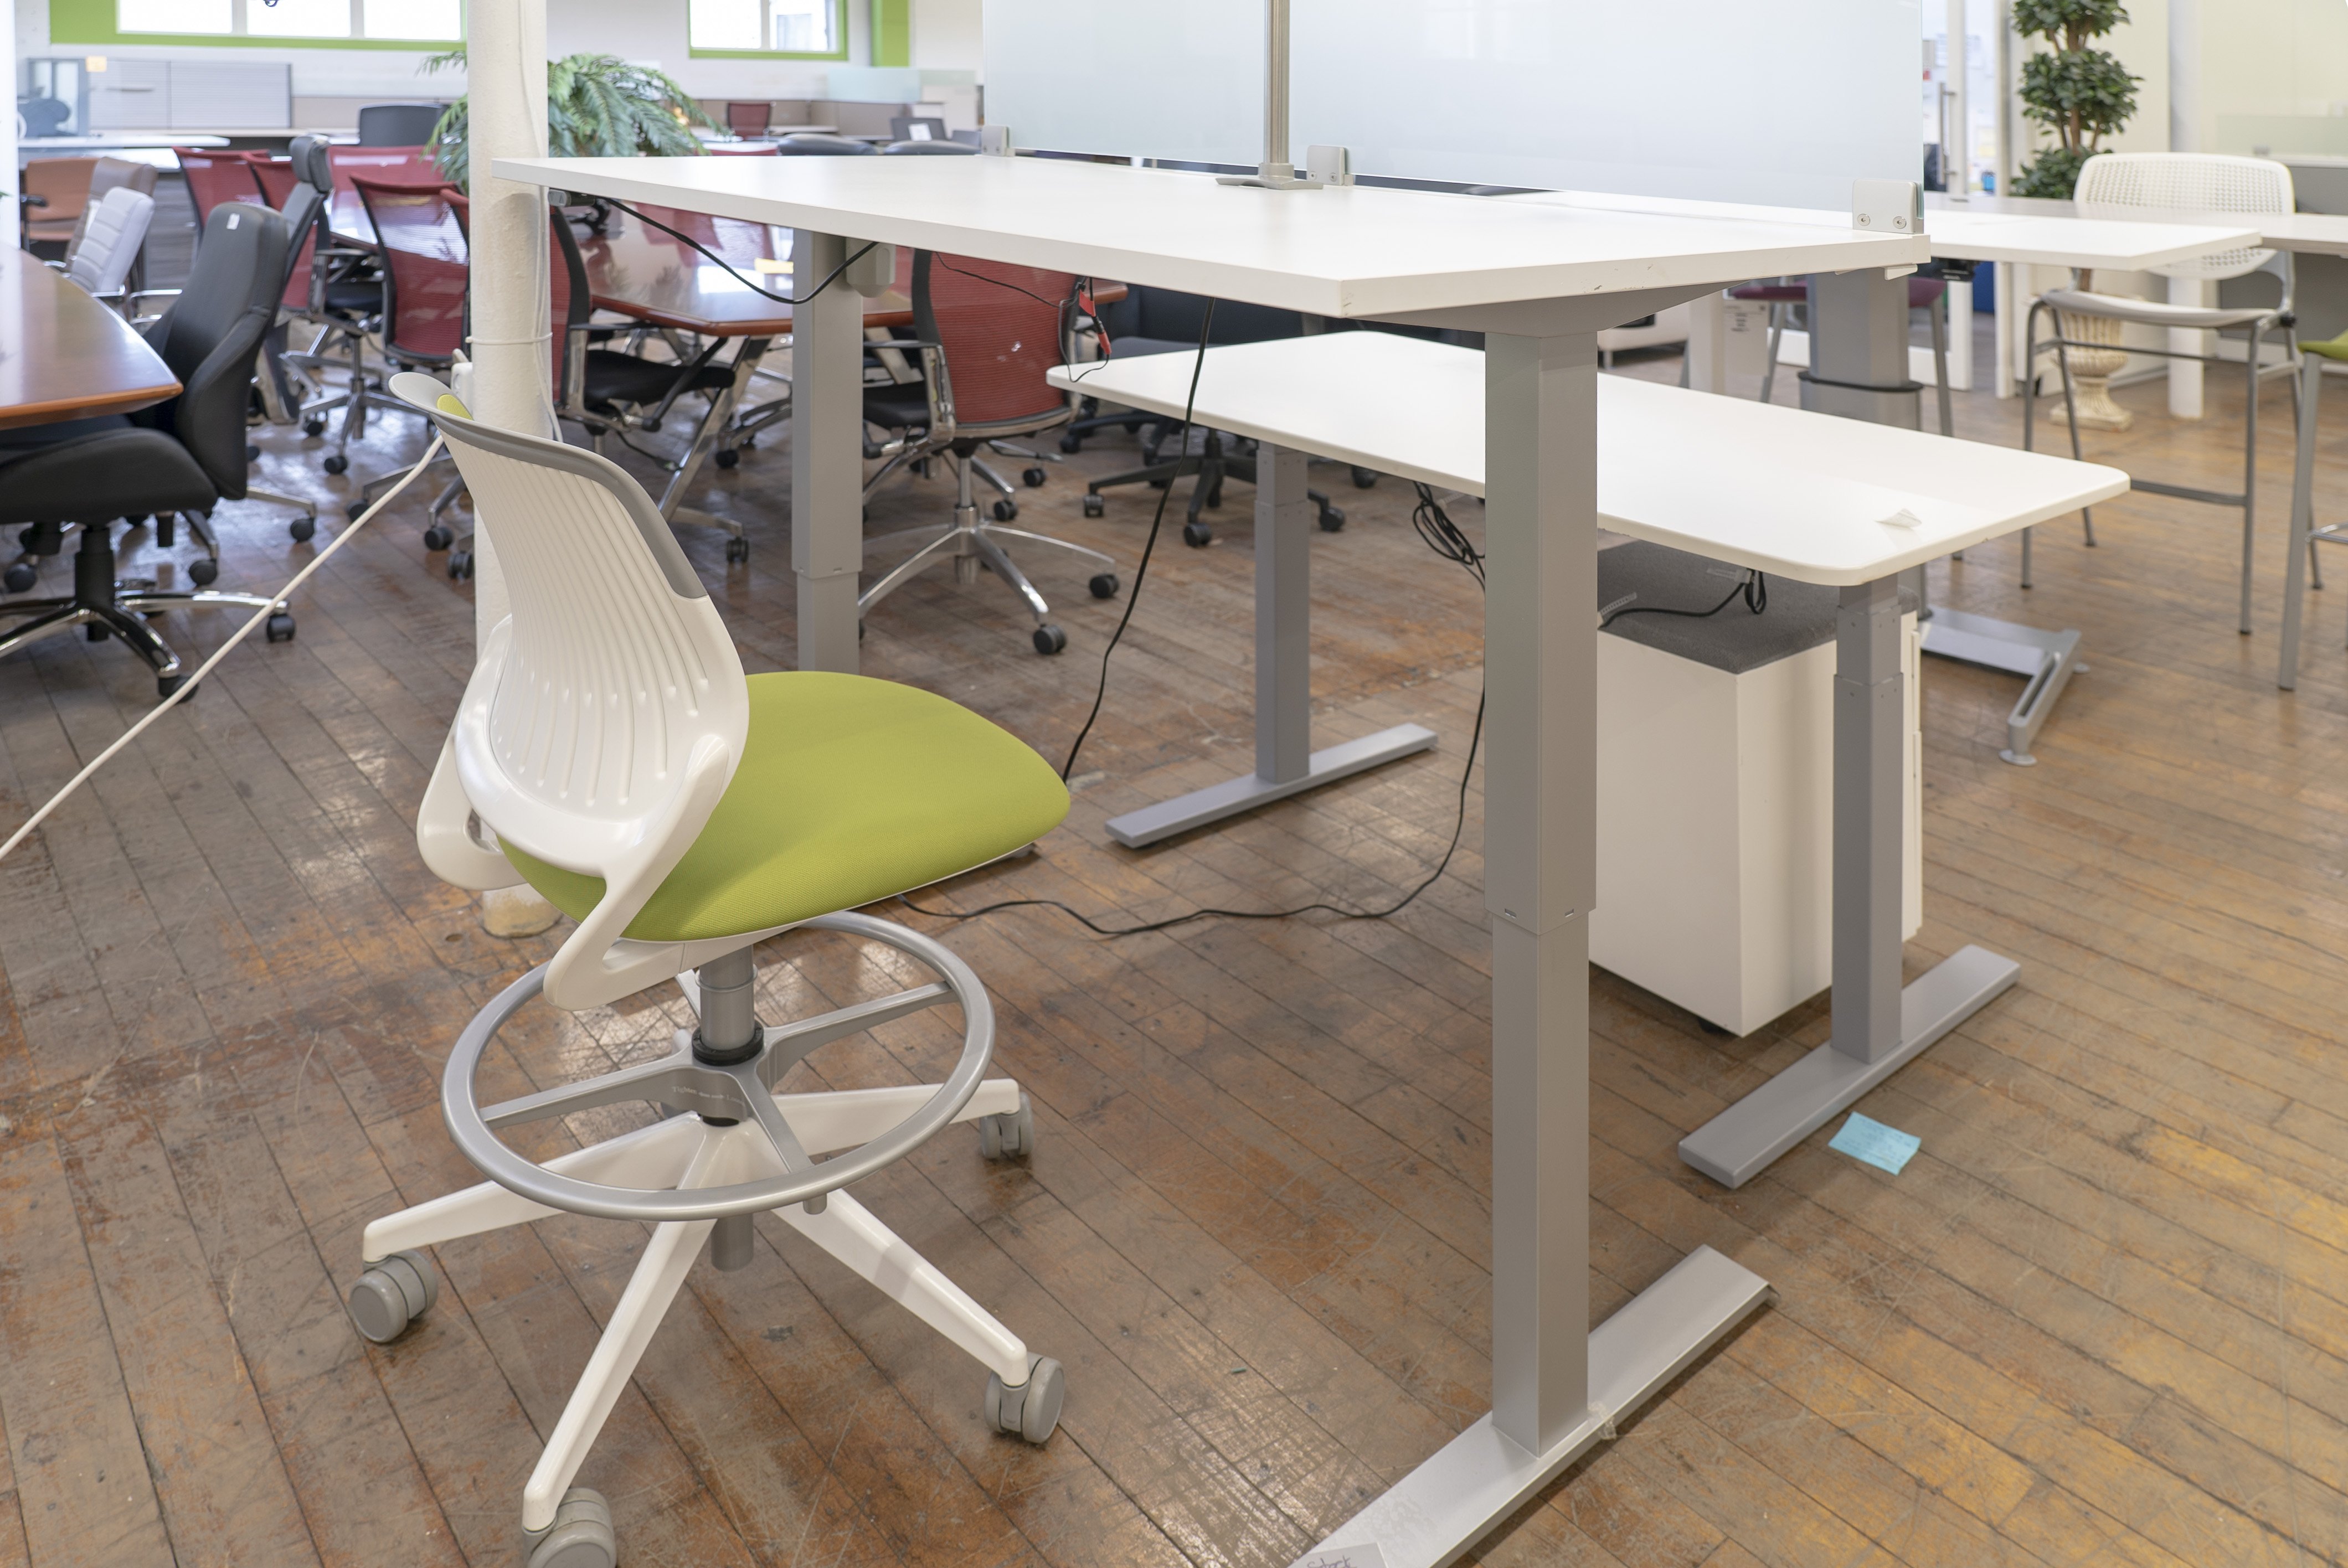 peartree-height-adjustable-sit-to-stand-desks-with-frosted-glass-screen